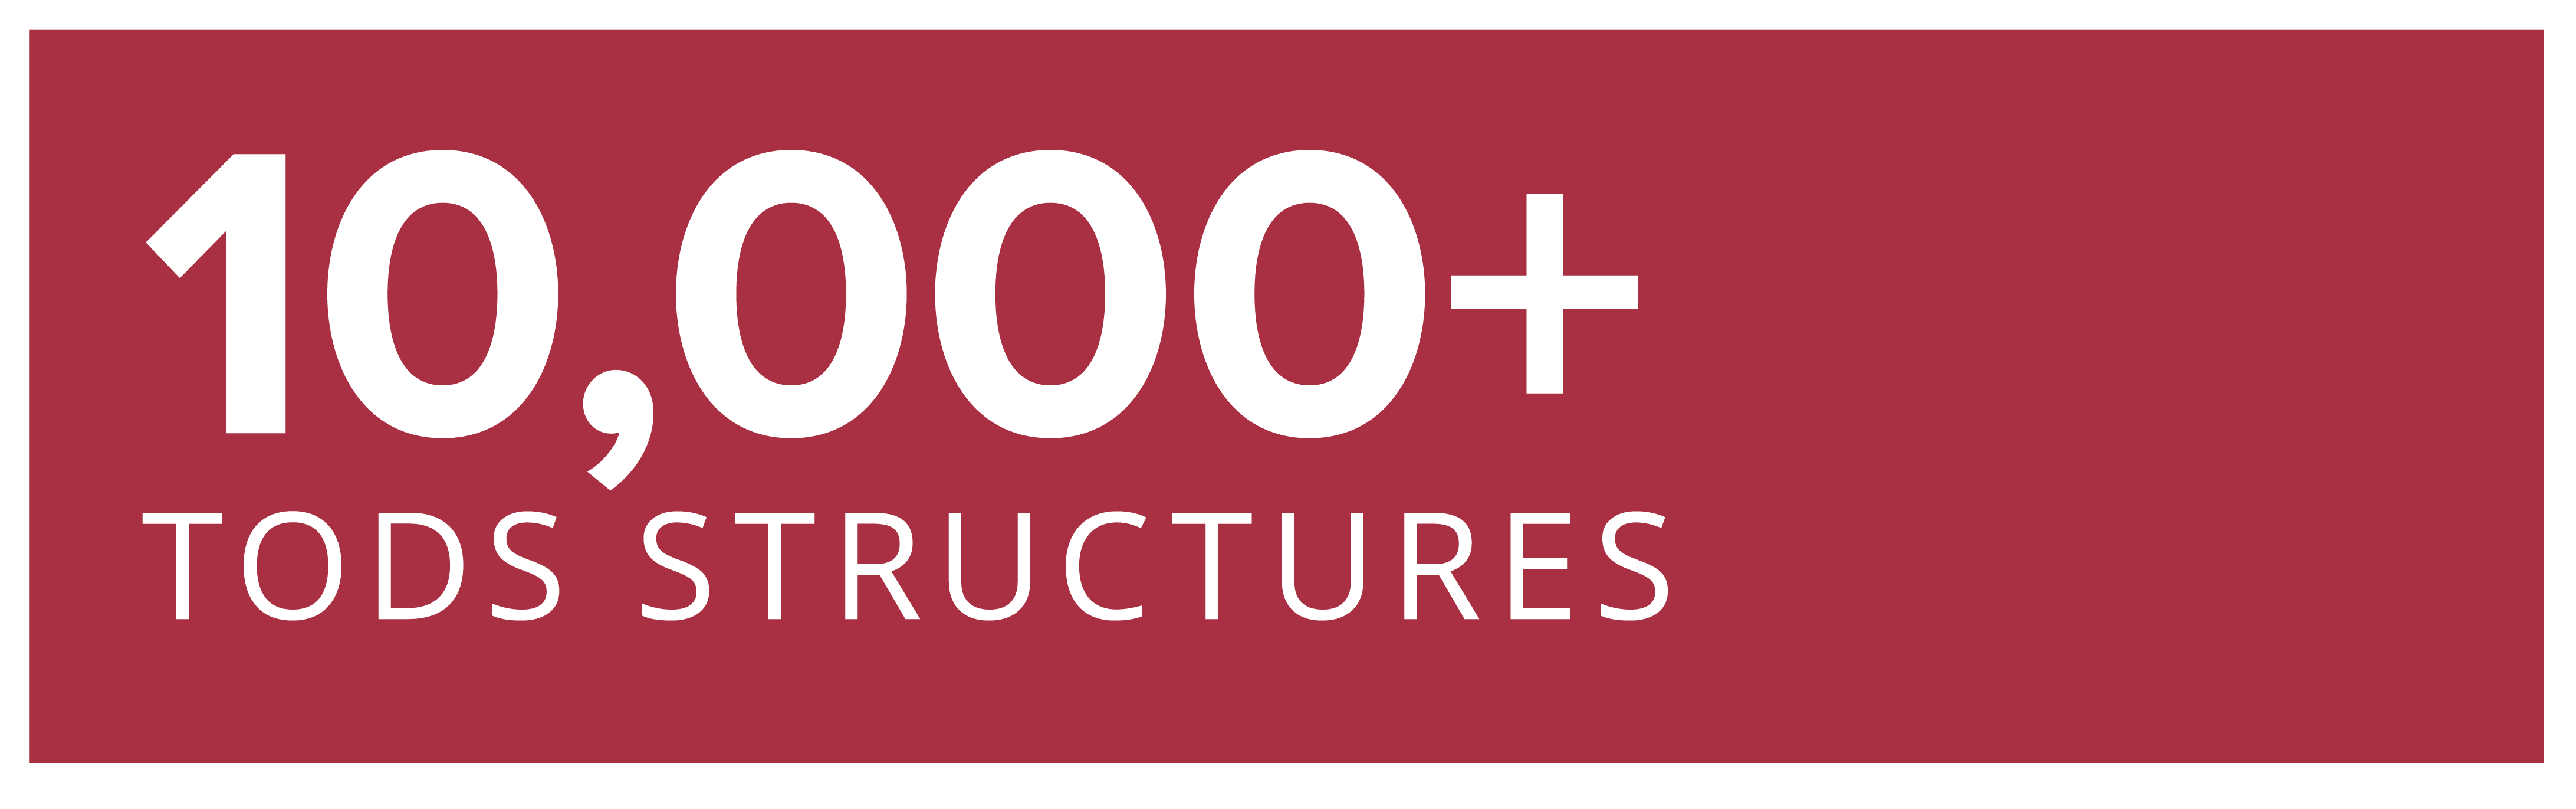 10,000+ TODS Structures